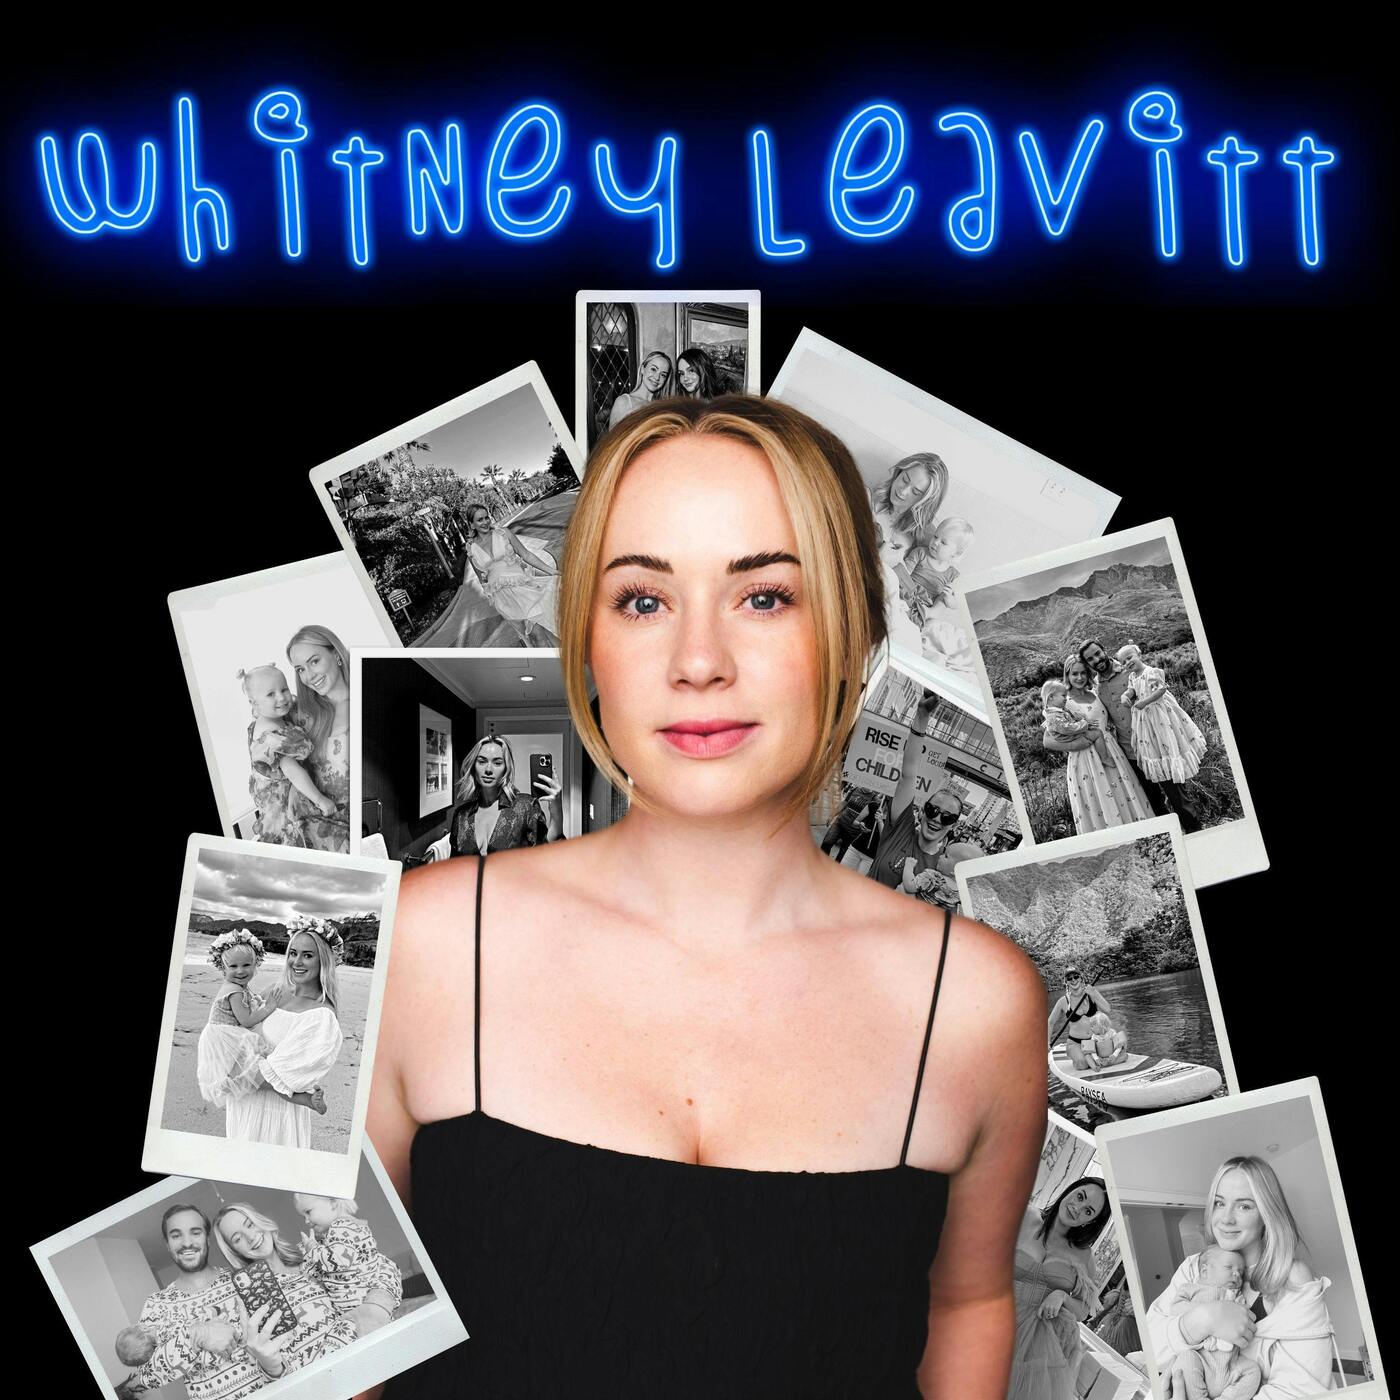 Vulnerable EP74: MomTok Star Whitney Leavitt on Controversy, Healing, and Future Goals